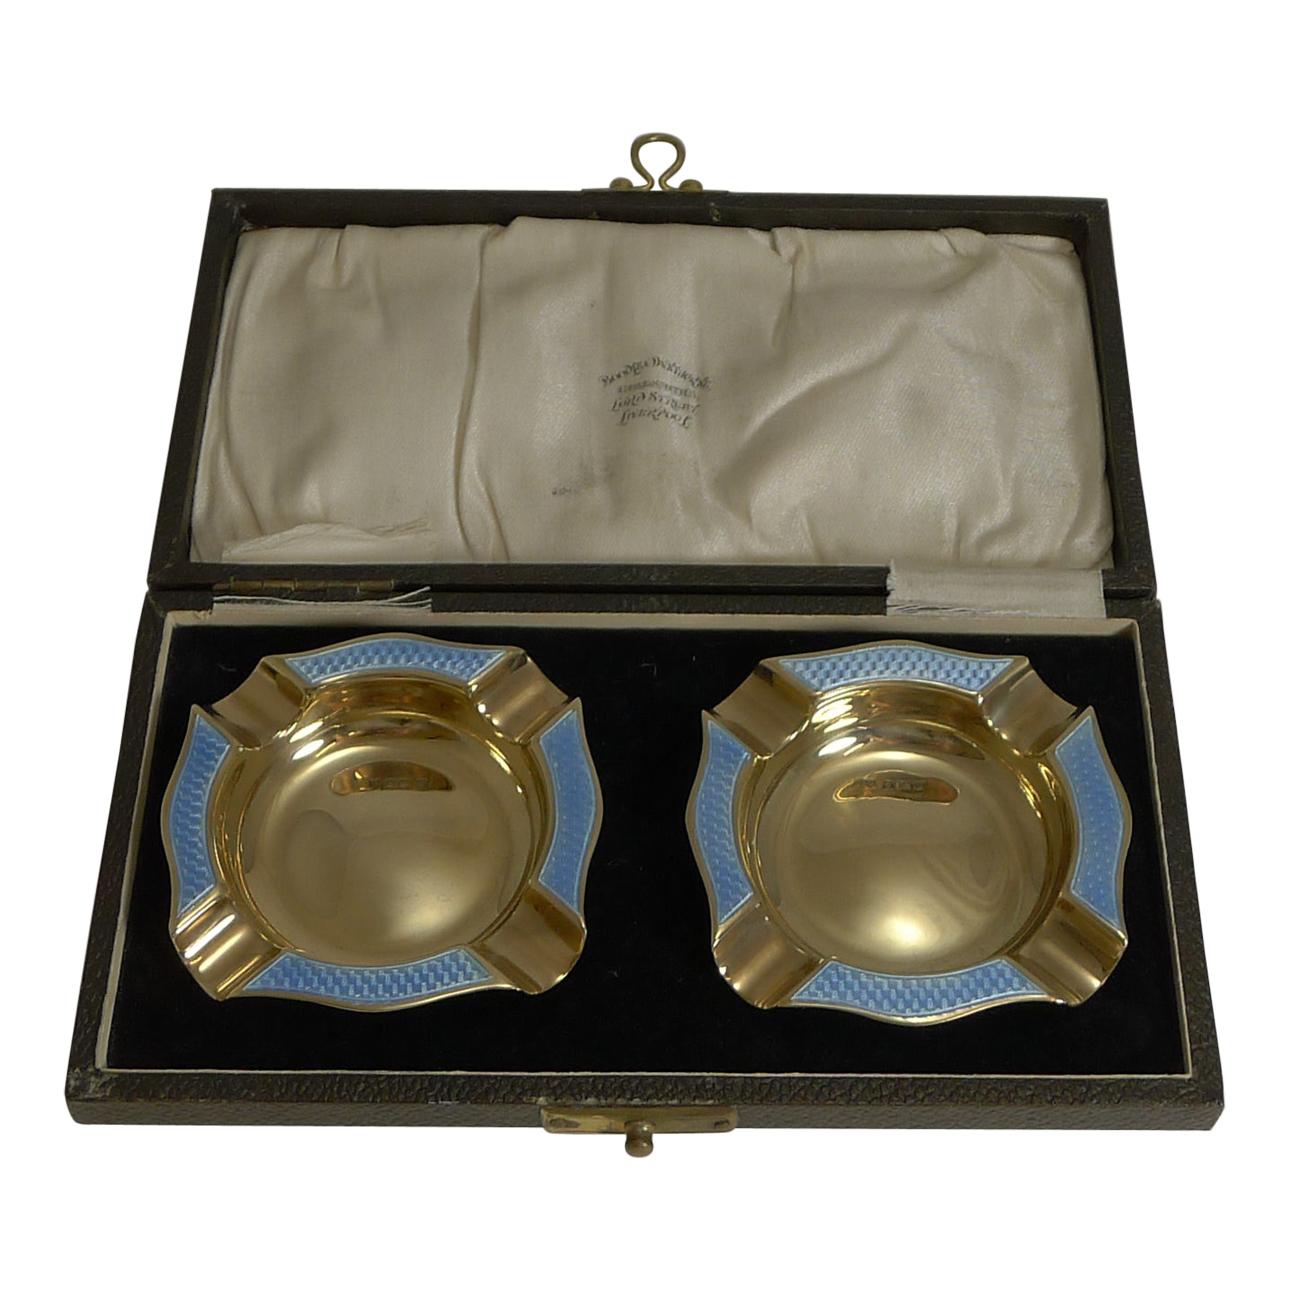 Rare Pair of Cased Silver Gilt and Blue Guilloche Enamel Ashtrays, 1929